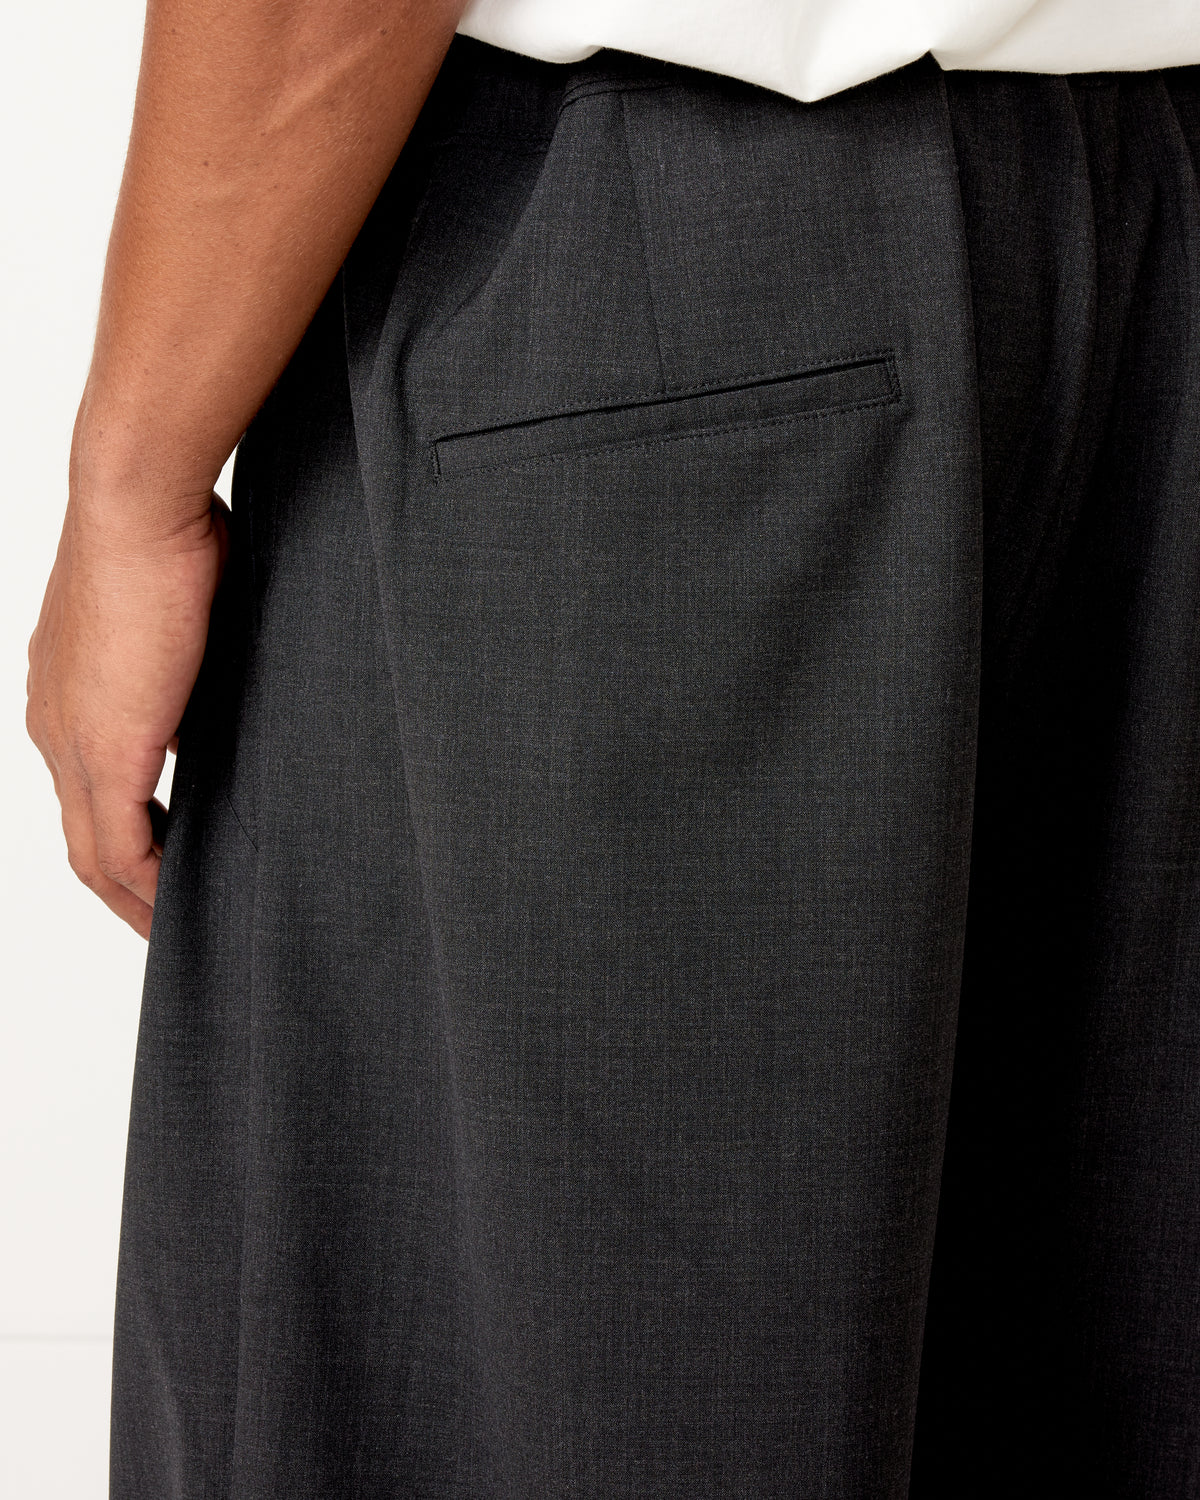 Shop our online store for trendy and useful Essential Hakama Pant